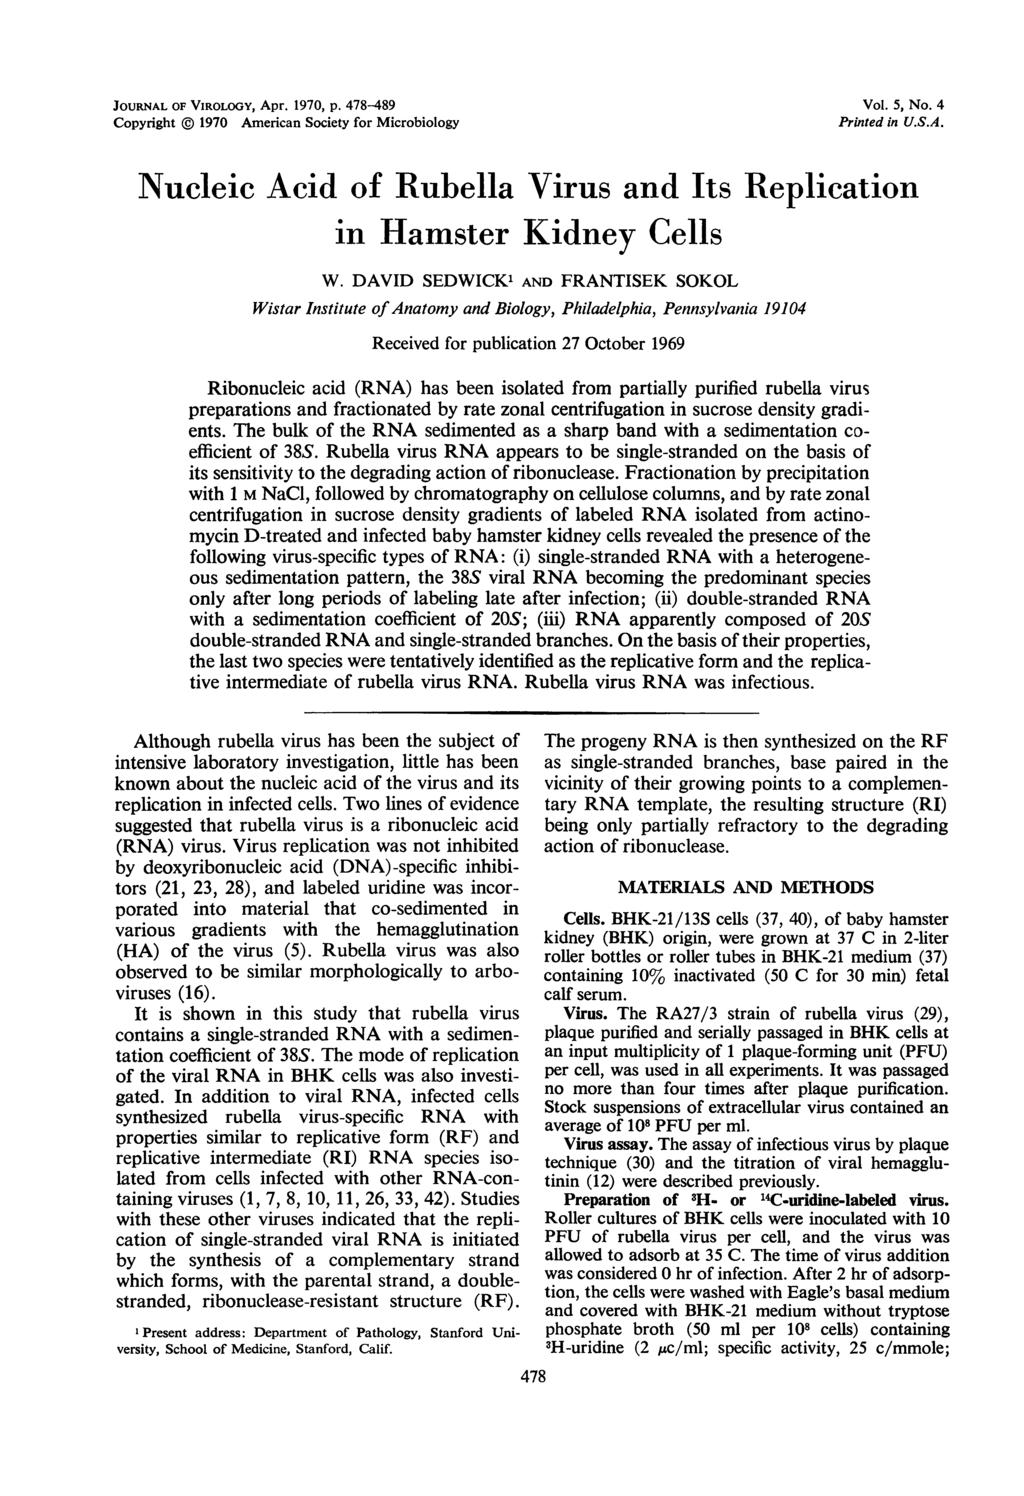 JOURNAL OF VIROLOGY, Apr. 197, p. 478-489 Vol. 5, No. 4 Copyright @ 197 American Society for Microbiology Printed in U.S.A. Nucleic Acid of Rubella Virus and Its Replication in Hamster Kidney Cells W.